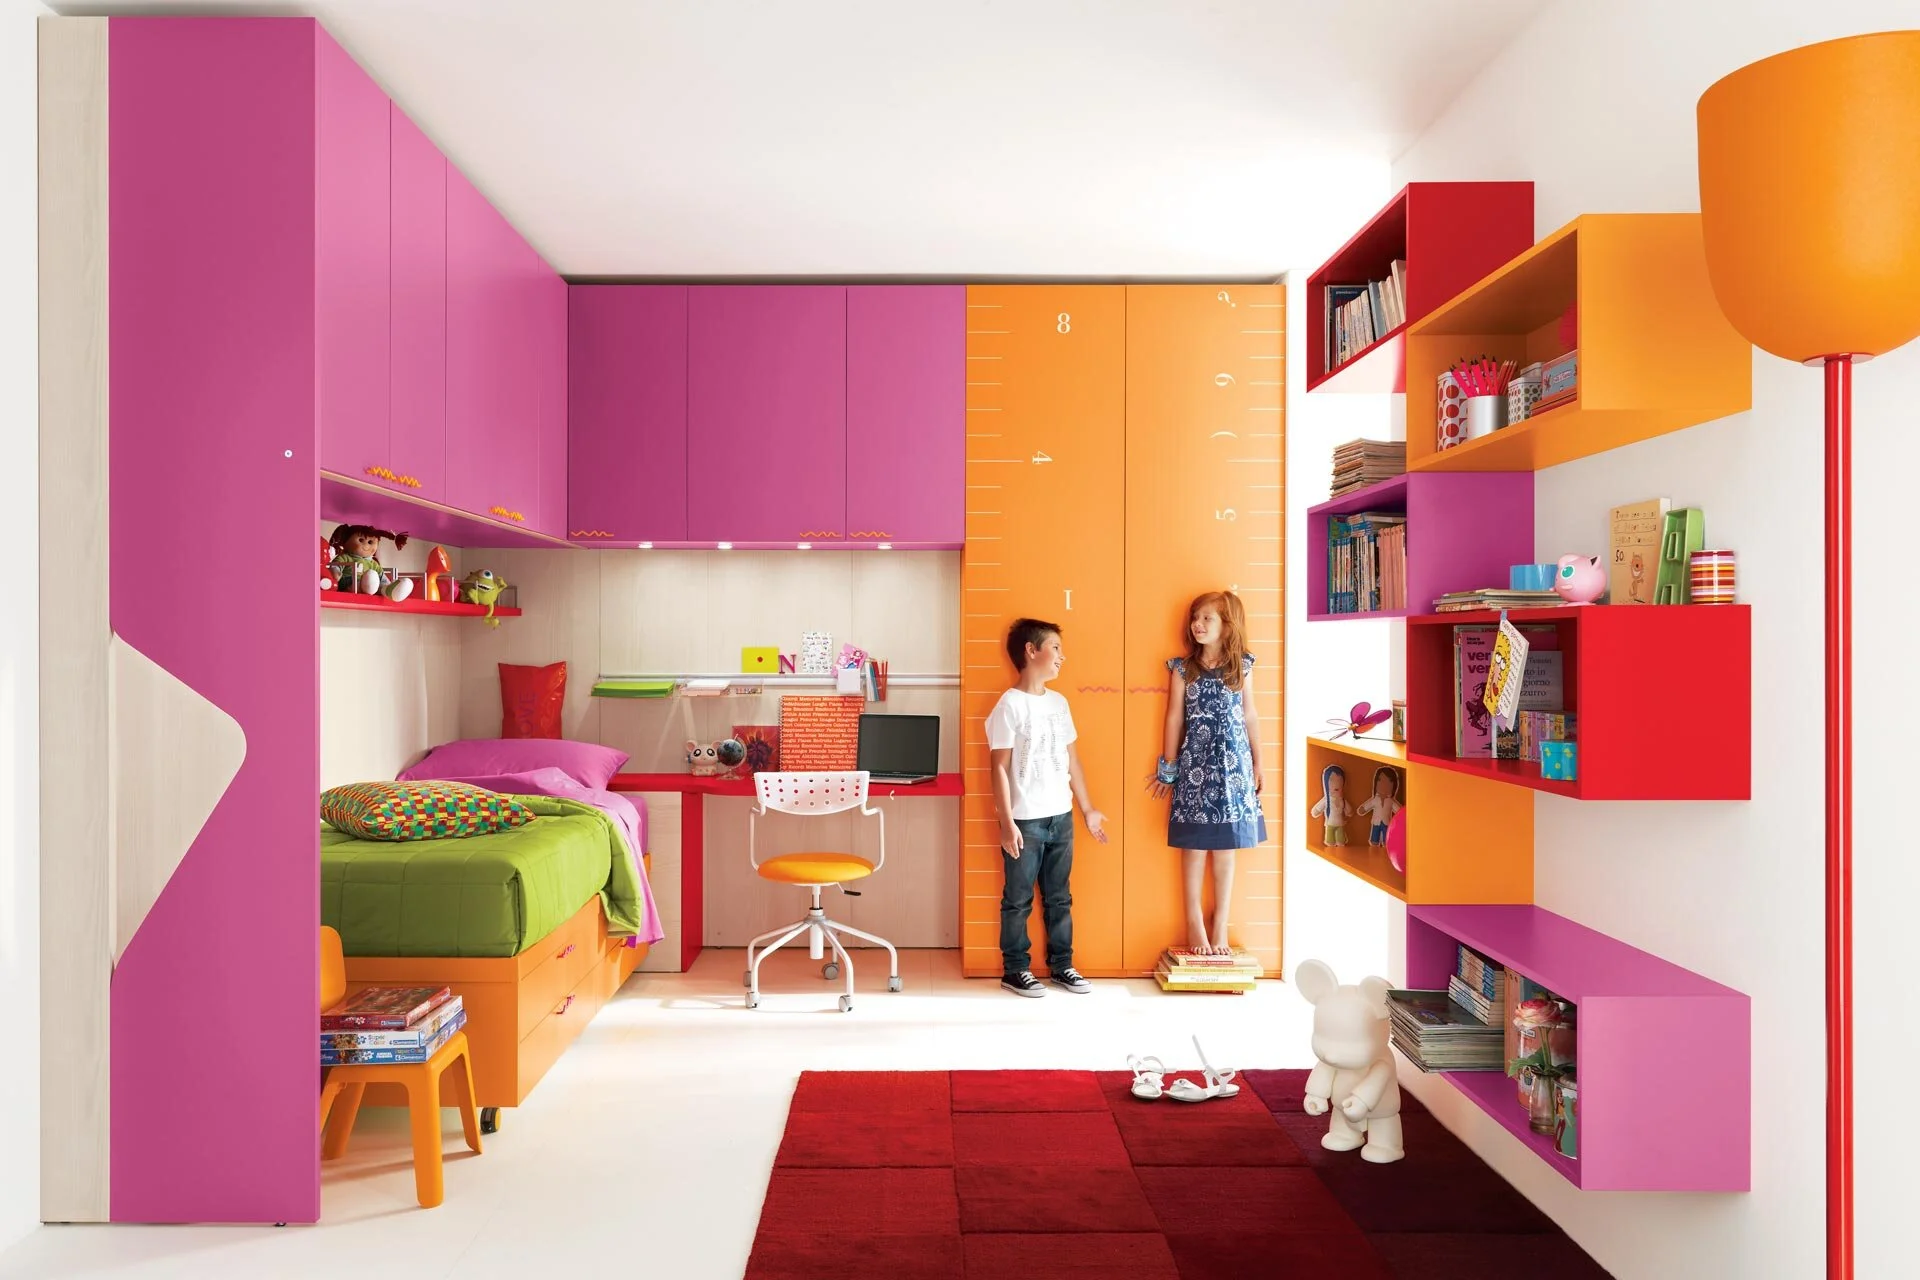 Kidsroom Furniture Bedroom Interior Bunk Beds Colorful Furniture Childrens Incredible Modern Children With Cool And Decoration Look Elegant Wooden Kid Bed Wardrobe And Study Desk Plus Chair Also Chic Pertaining To Give The Best Decoration For Children’s Rooms With Best Children’s Room Design Ideas